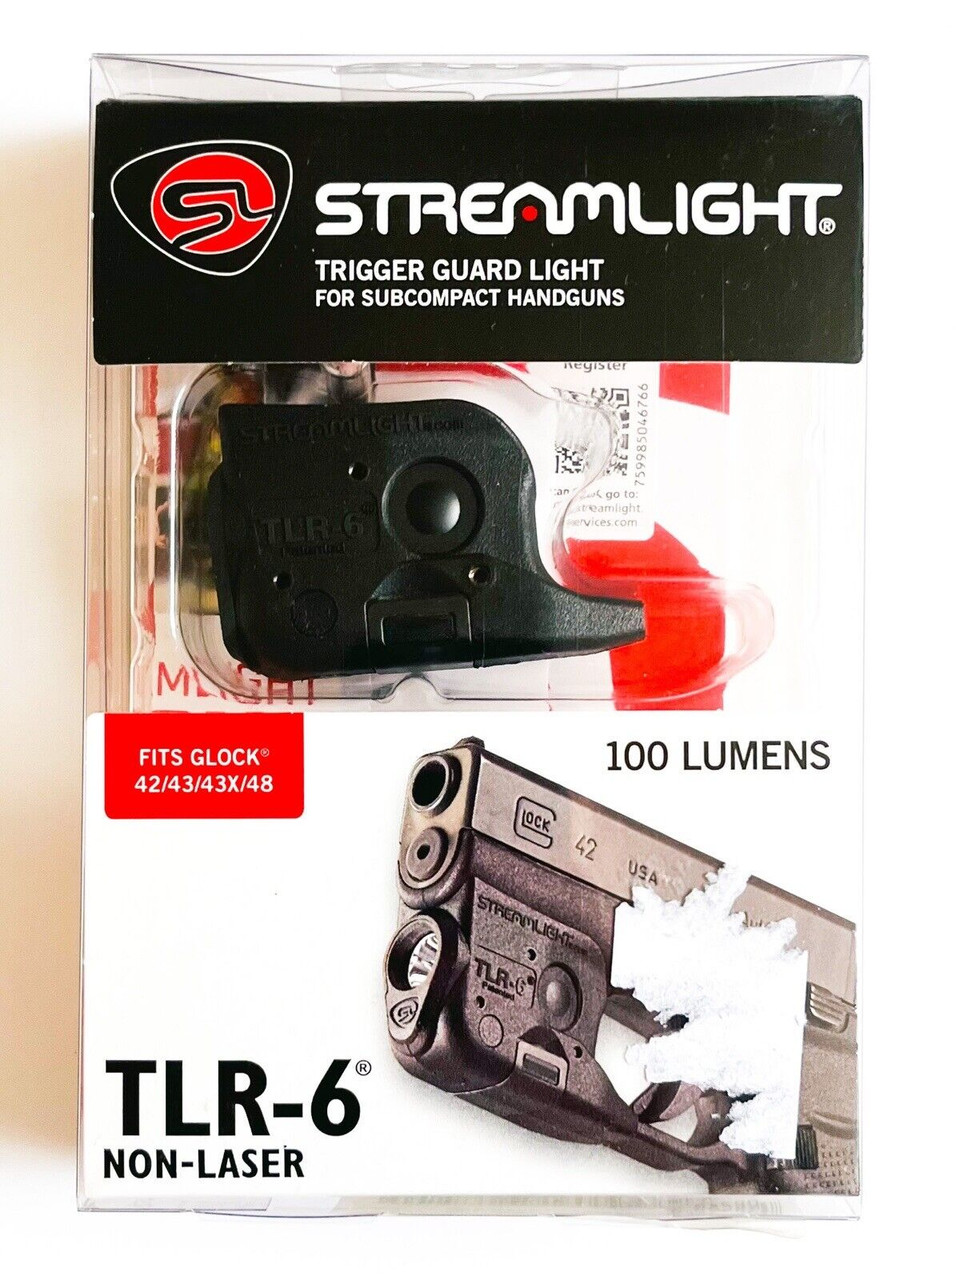 Used Streamlight TLR-6 NON LASER for Glock 42,43,43X & 48

Packaging has been opened and may have minor wear and tear. Item has been inspected and has been turned on to test (item may have very light scuffs and or signs of handling from inspection but nothing significant). Both batteries, Allen key and instructions are included.




Streamlight 69280 TLR-6 100-Lumen Pistol Light without Laser, Black

 
